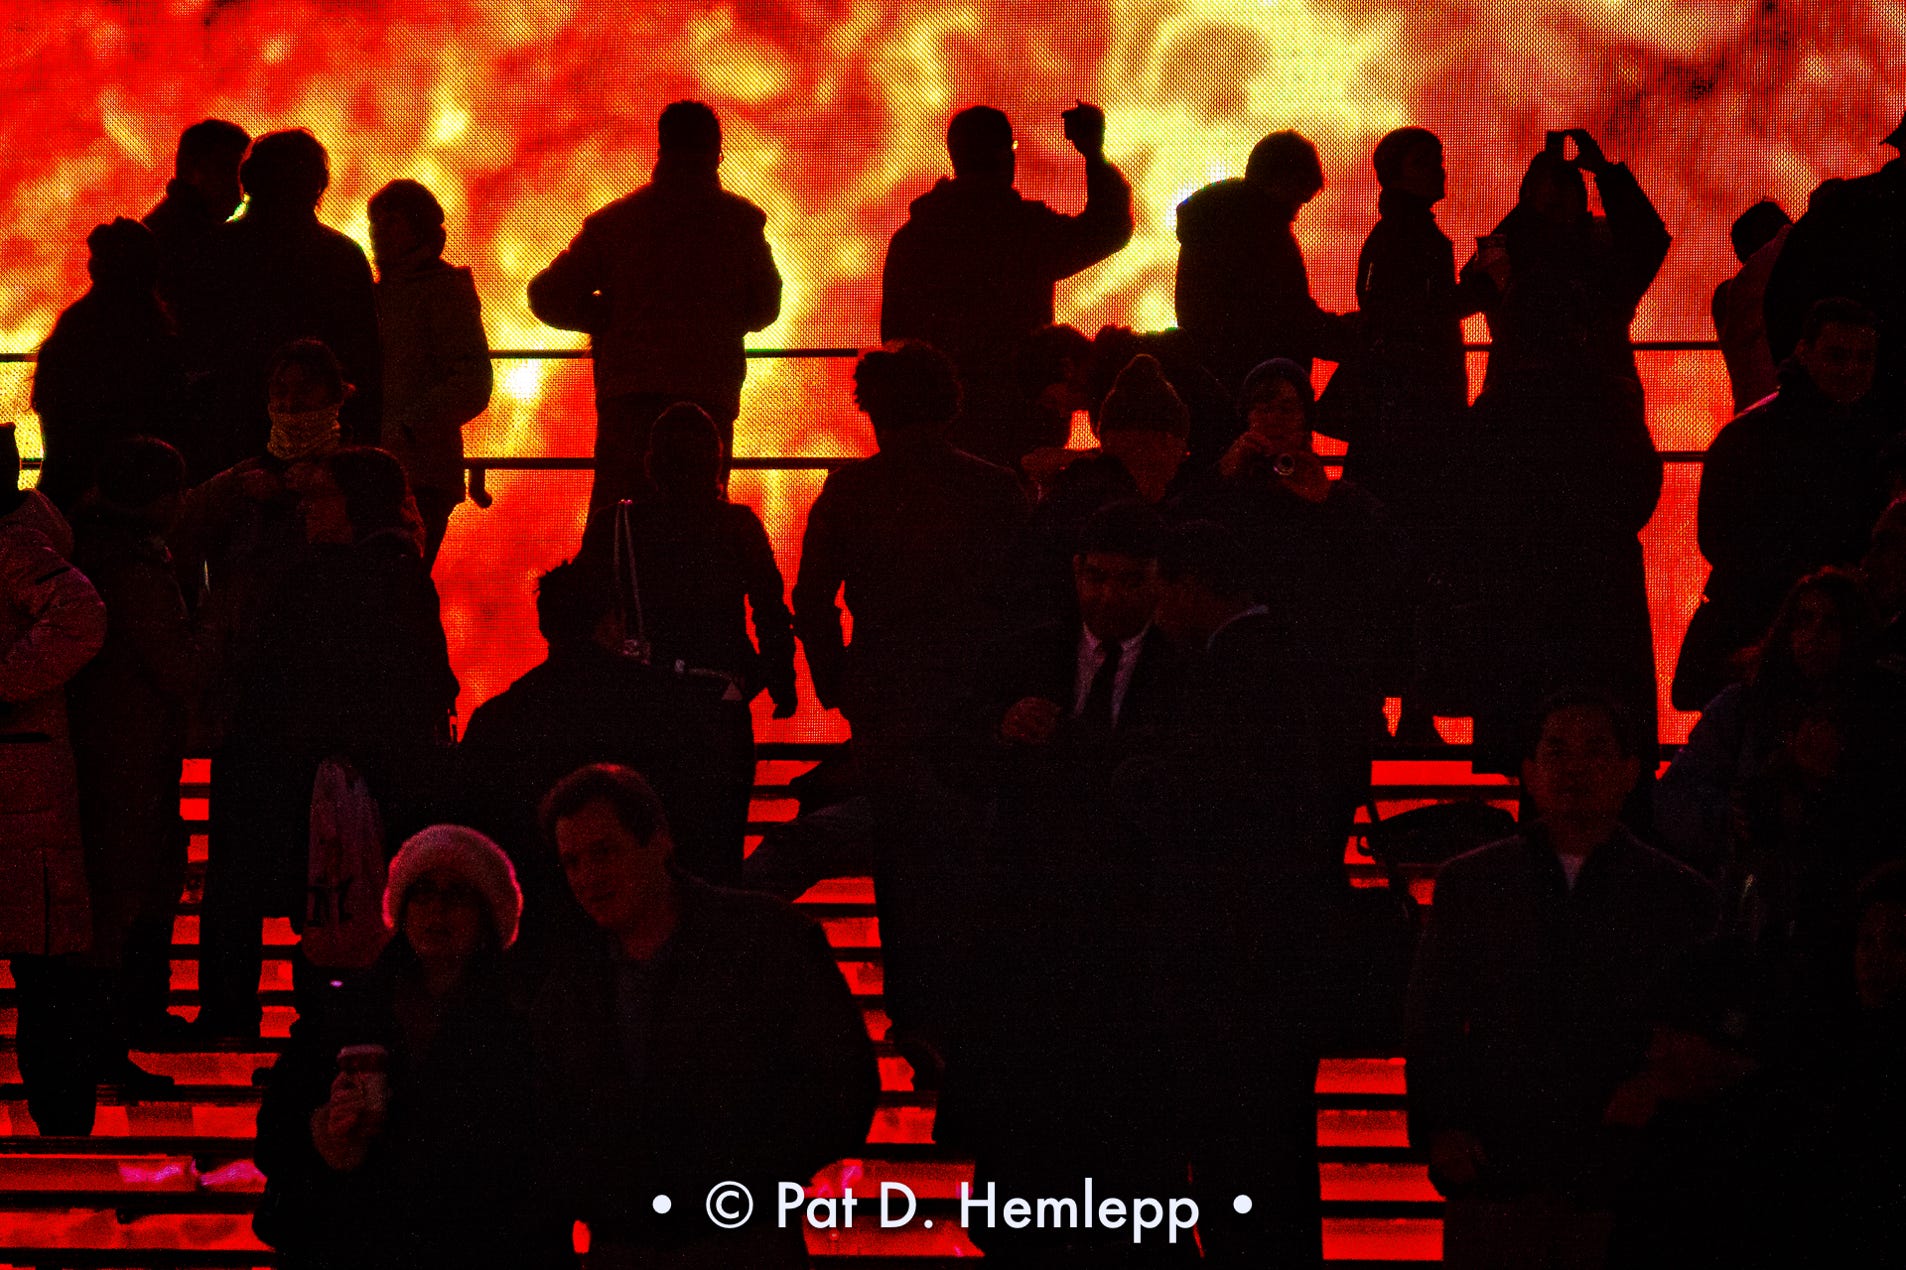 Visitors silhouetted against the flames of a video billboard atop the ruby red steps in Times Square, New York City.